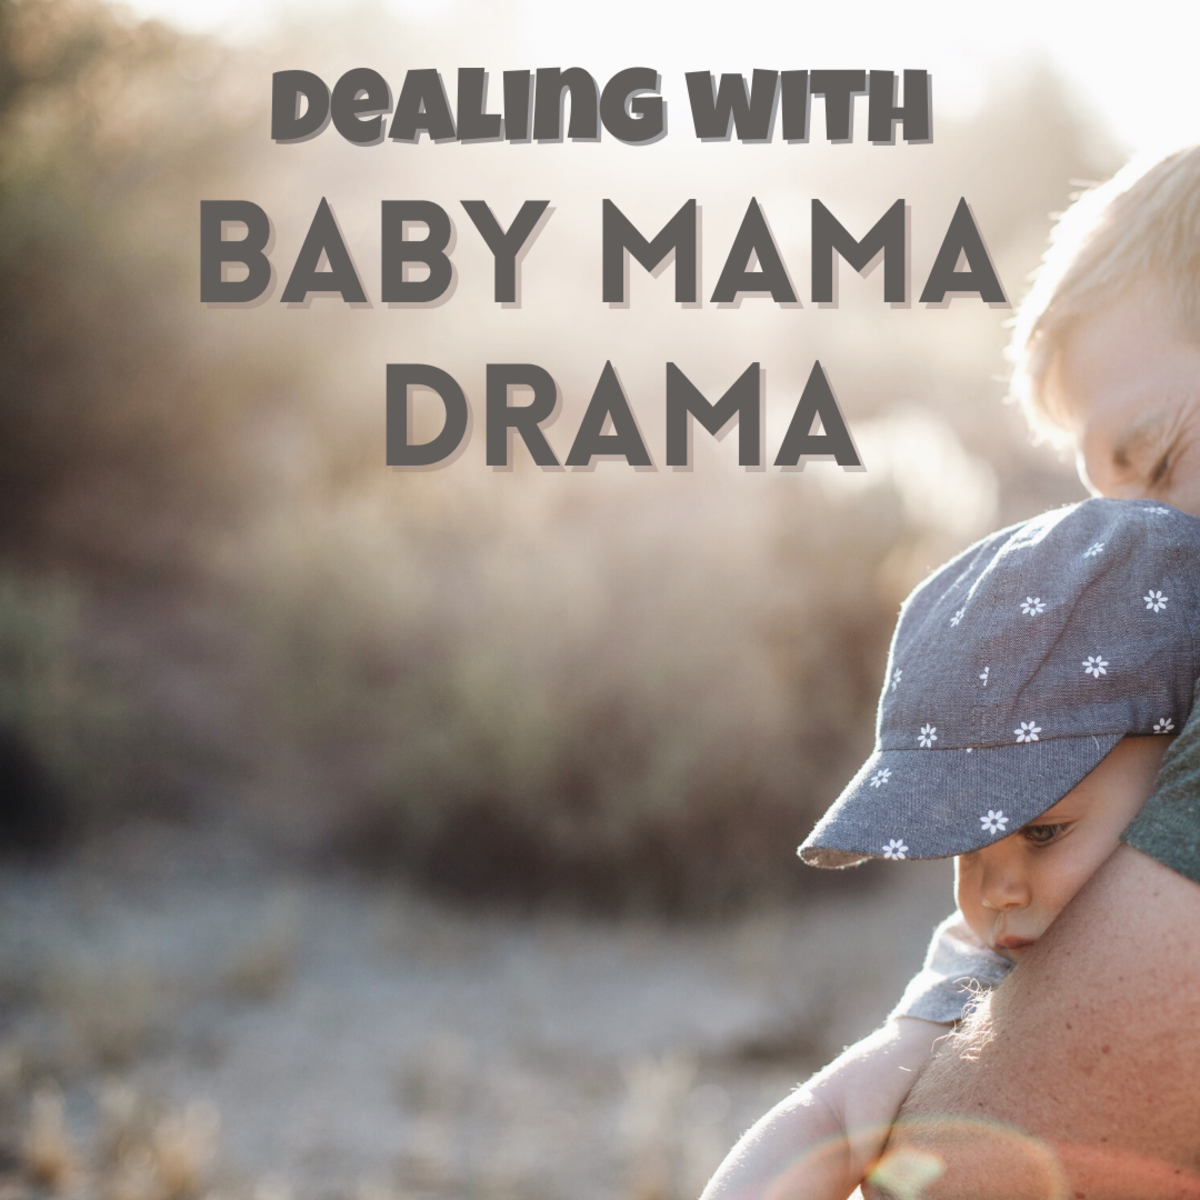 How to Deal With Baby Mama Drama